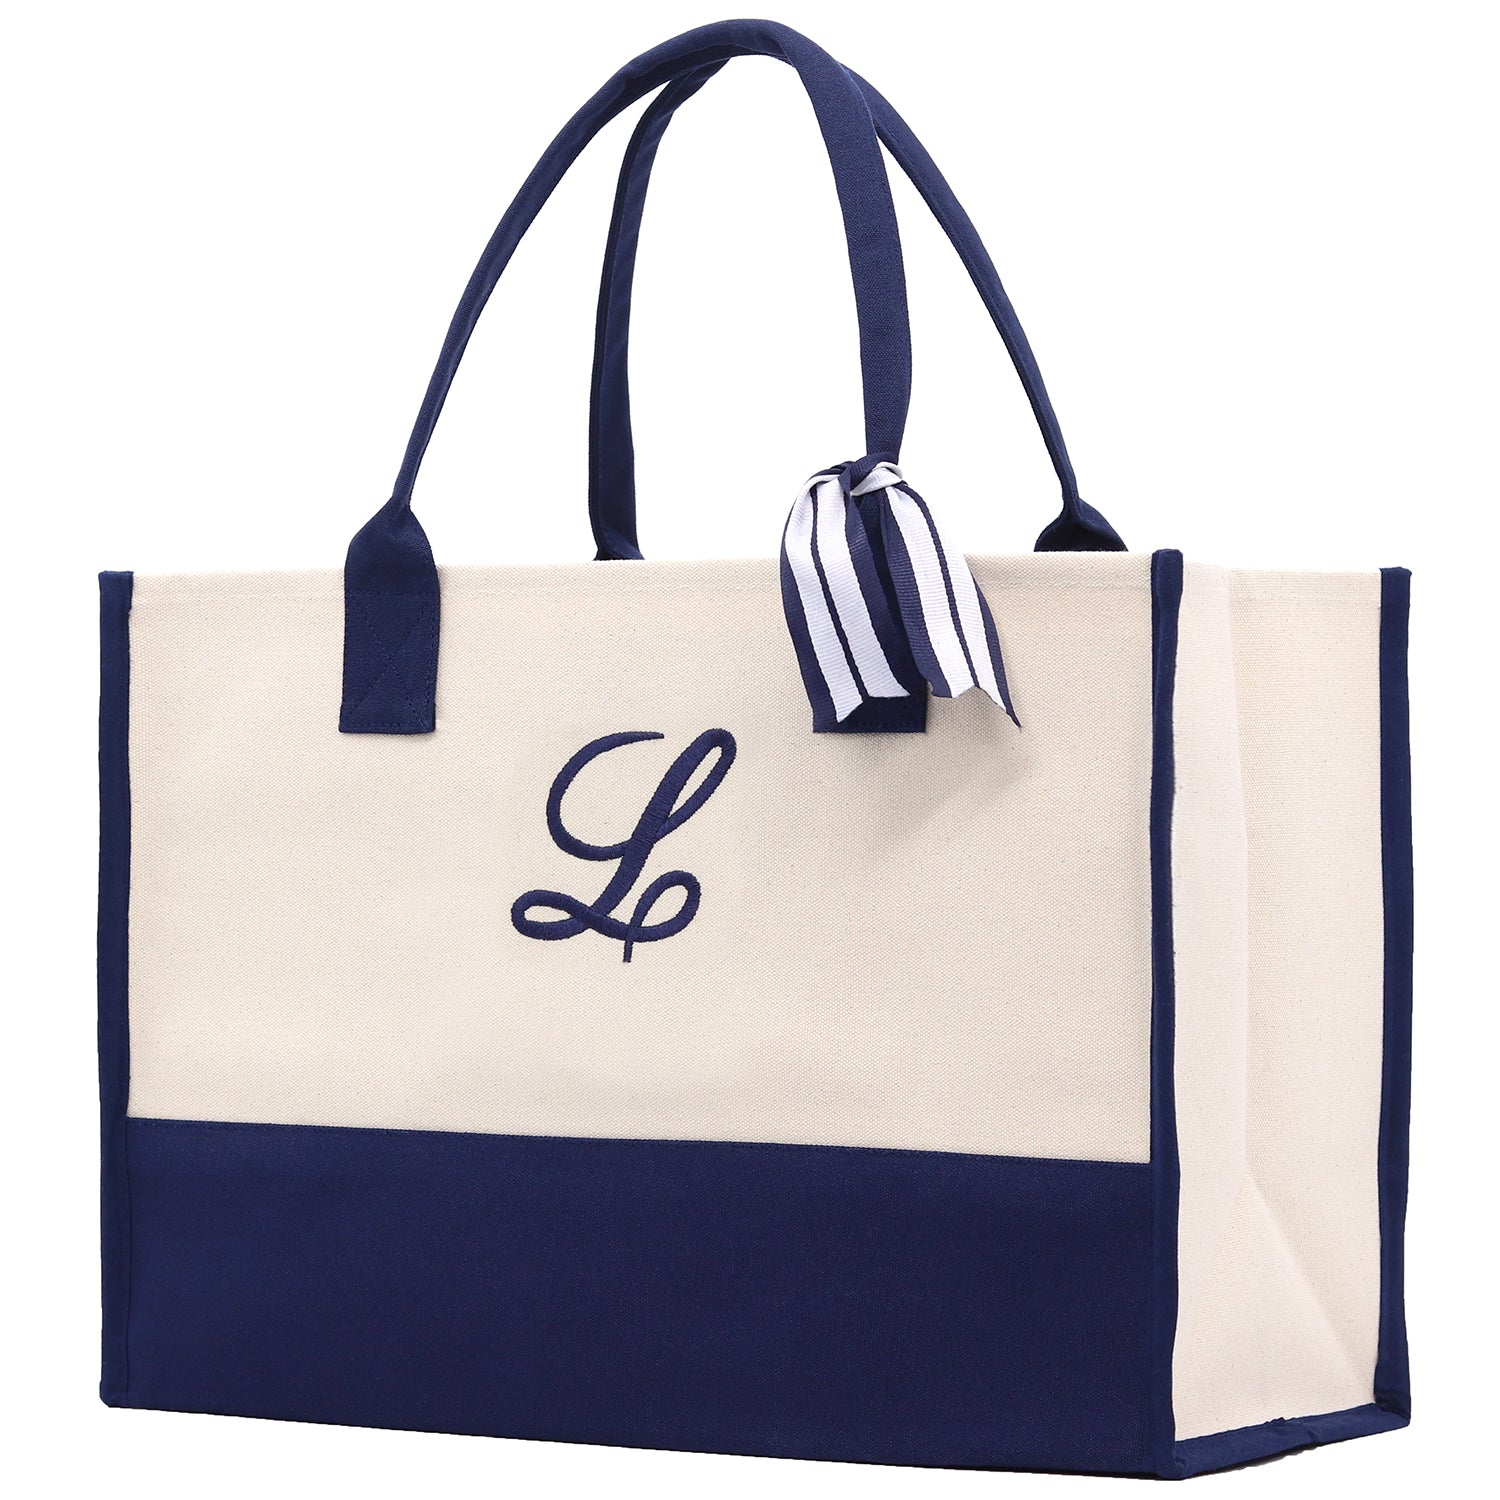 Monogram Tote Bag with 100% Cotton Canvas and a Chic Personalized Monogram Navy Blue Vanessa Rosella Script L 